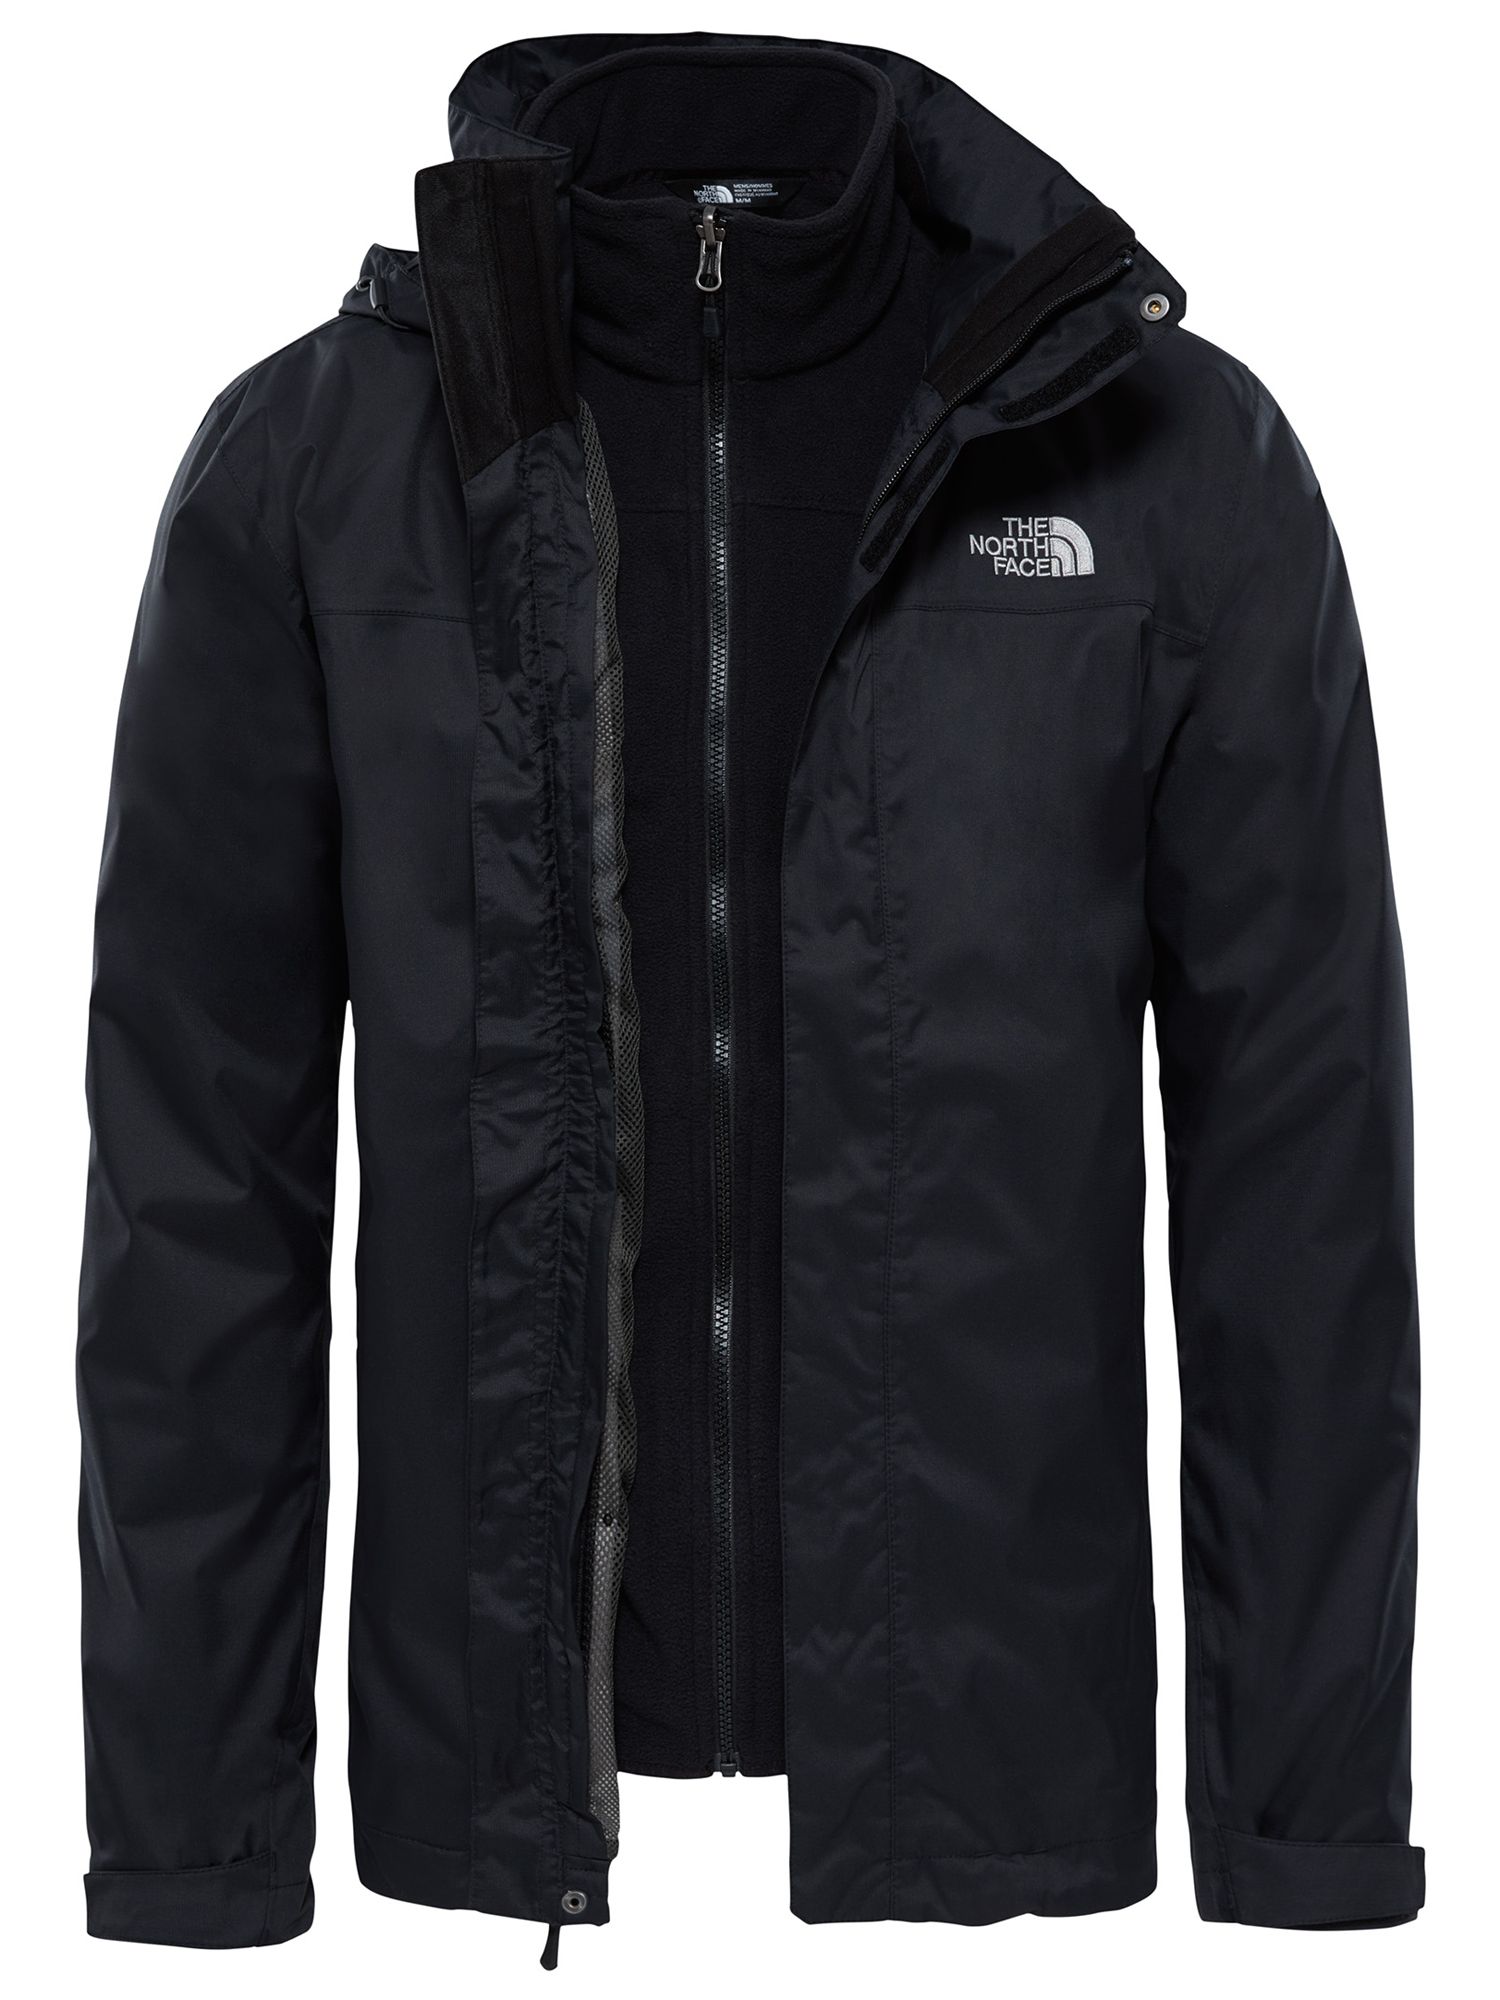 krma Stalno med the north face hyvent 3 